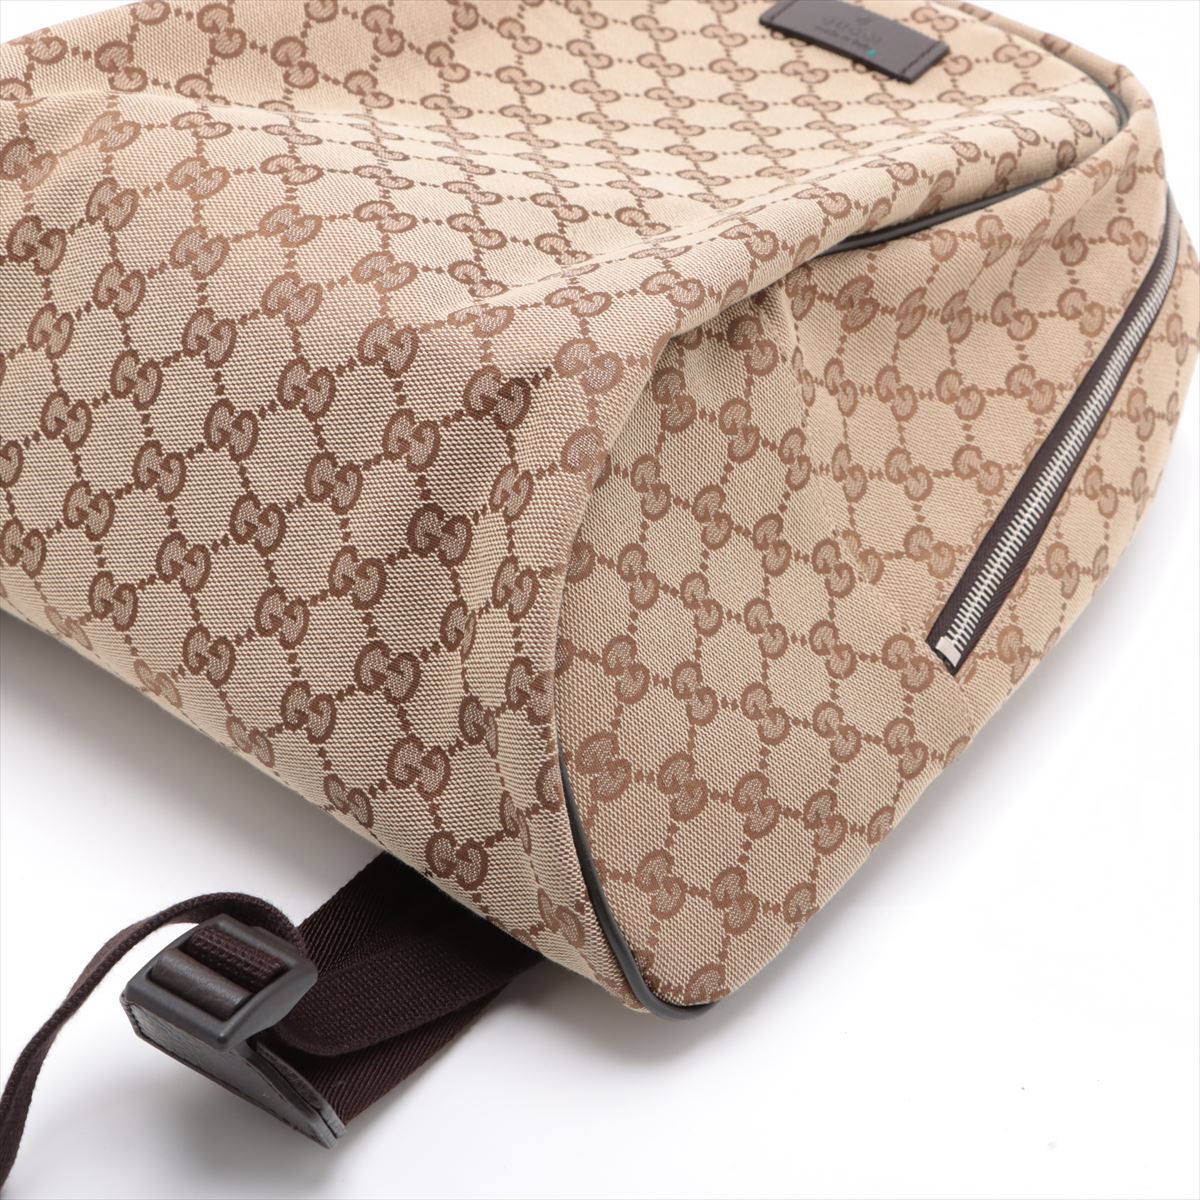 Gucci GG Canvas Backpack Brown 449906